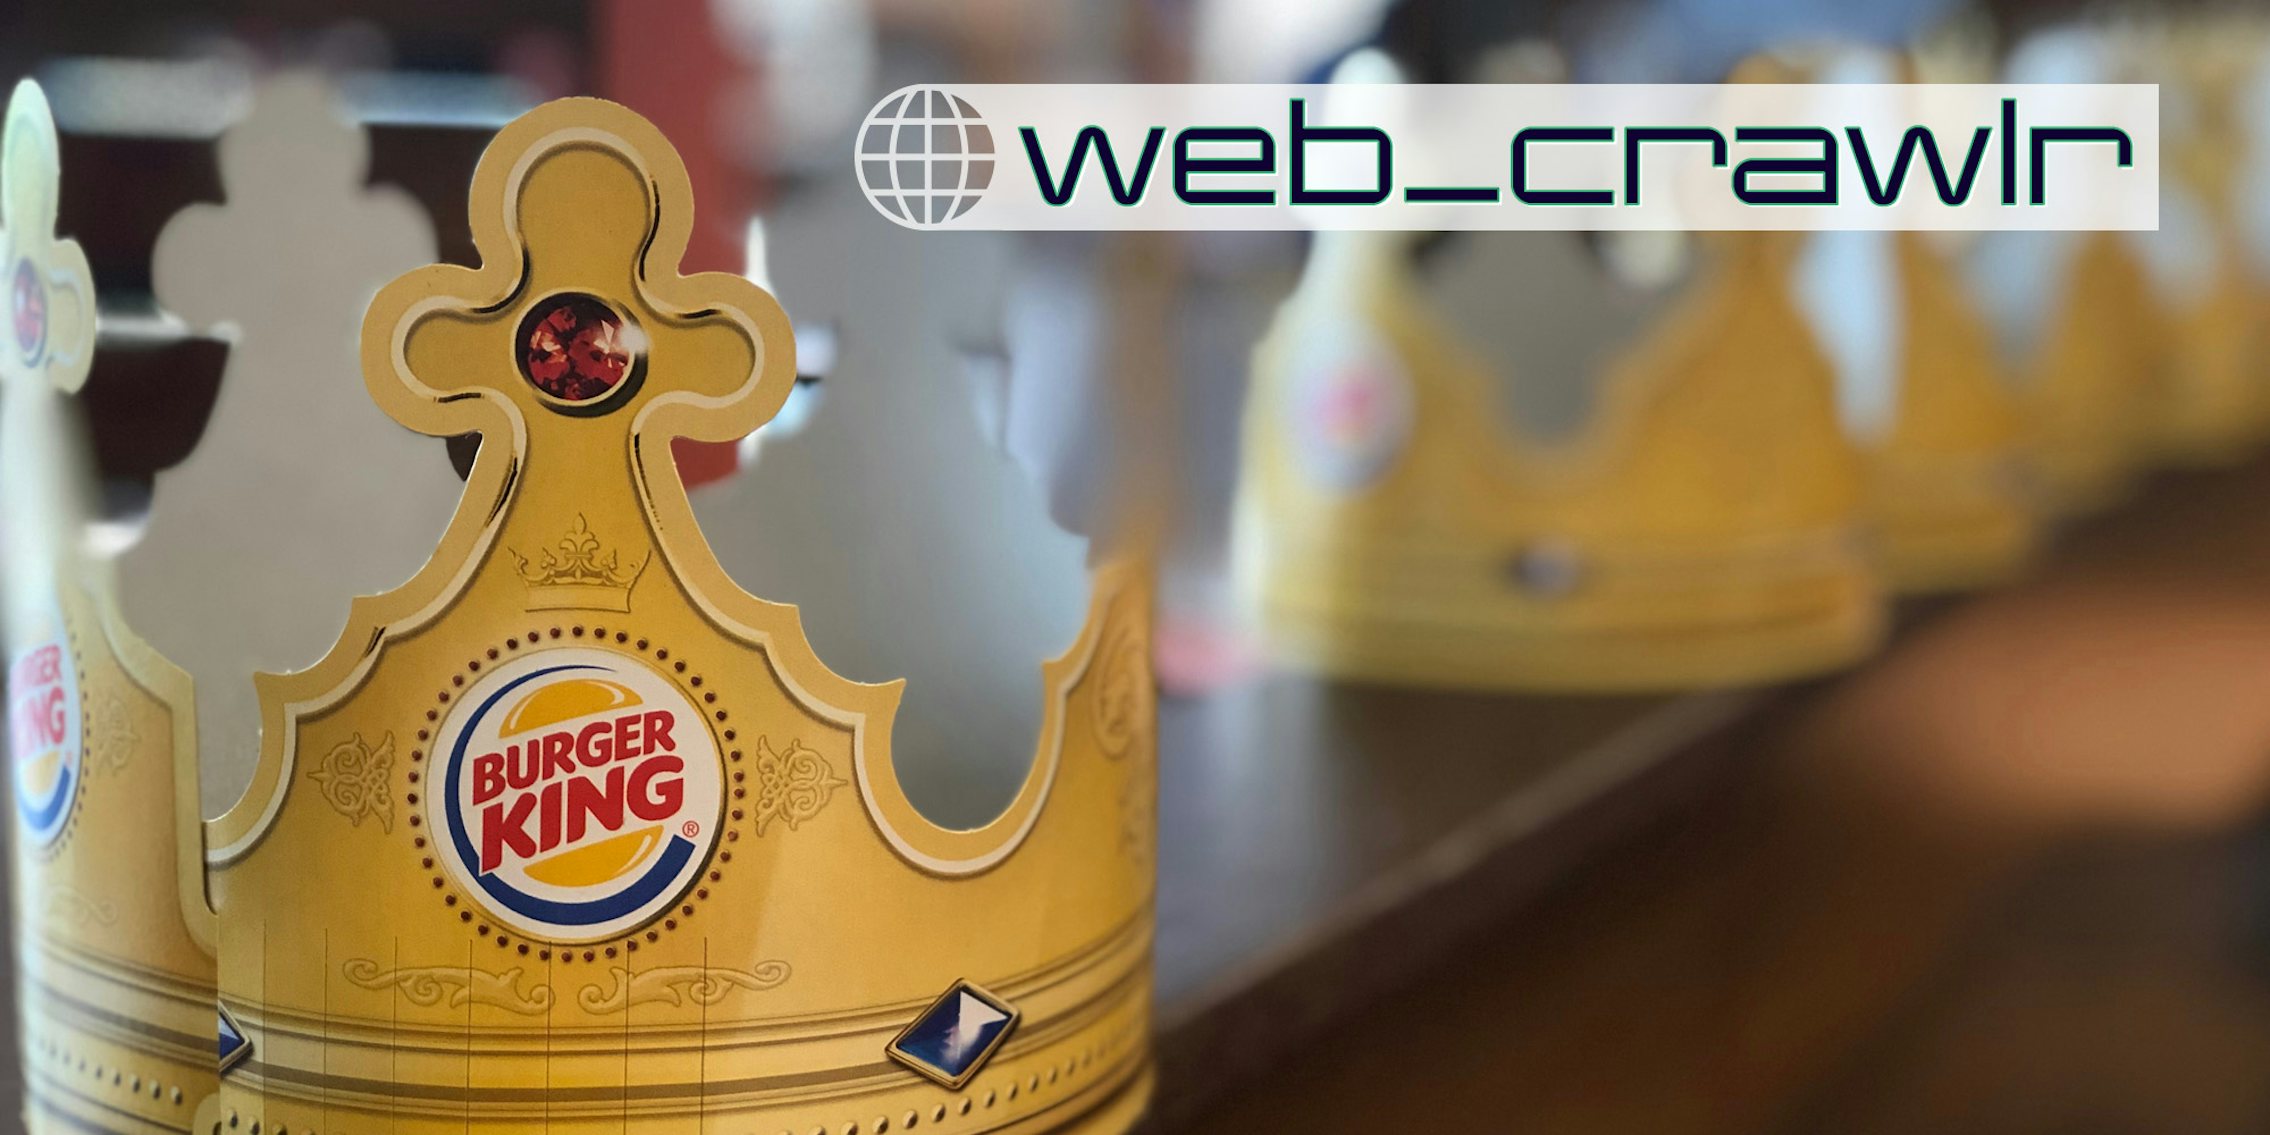 A Burger King Crown. The Daily Dot newsletter web_crawlr logo is in the bottom right corner.